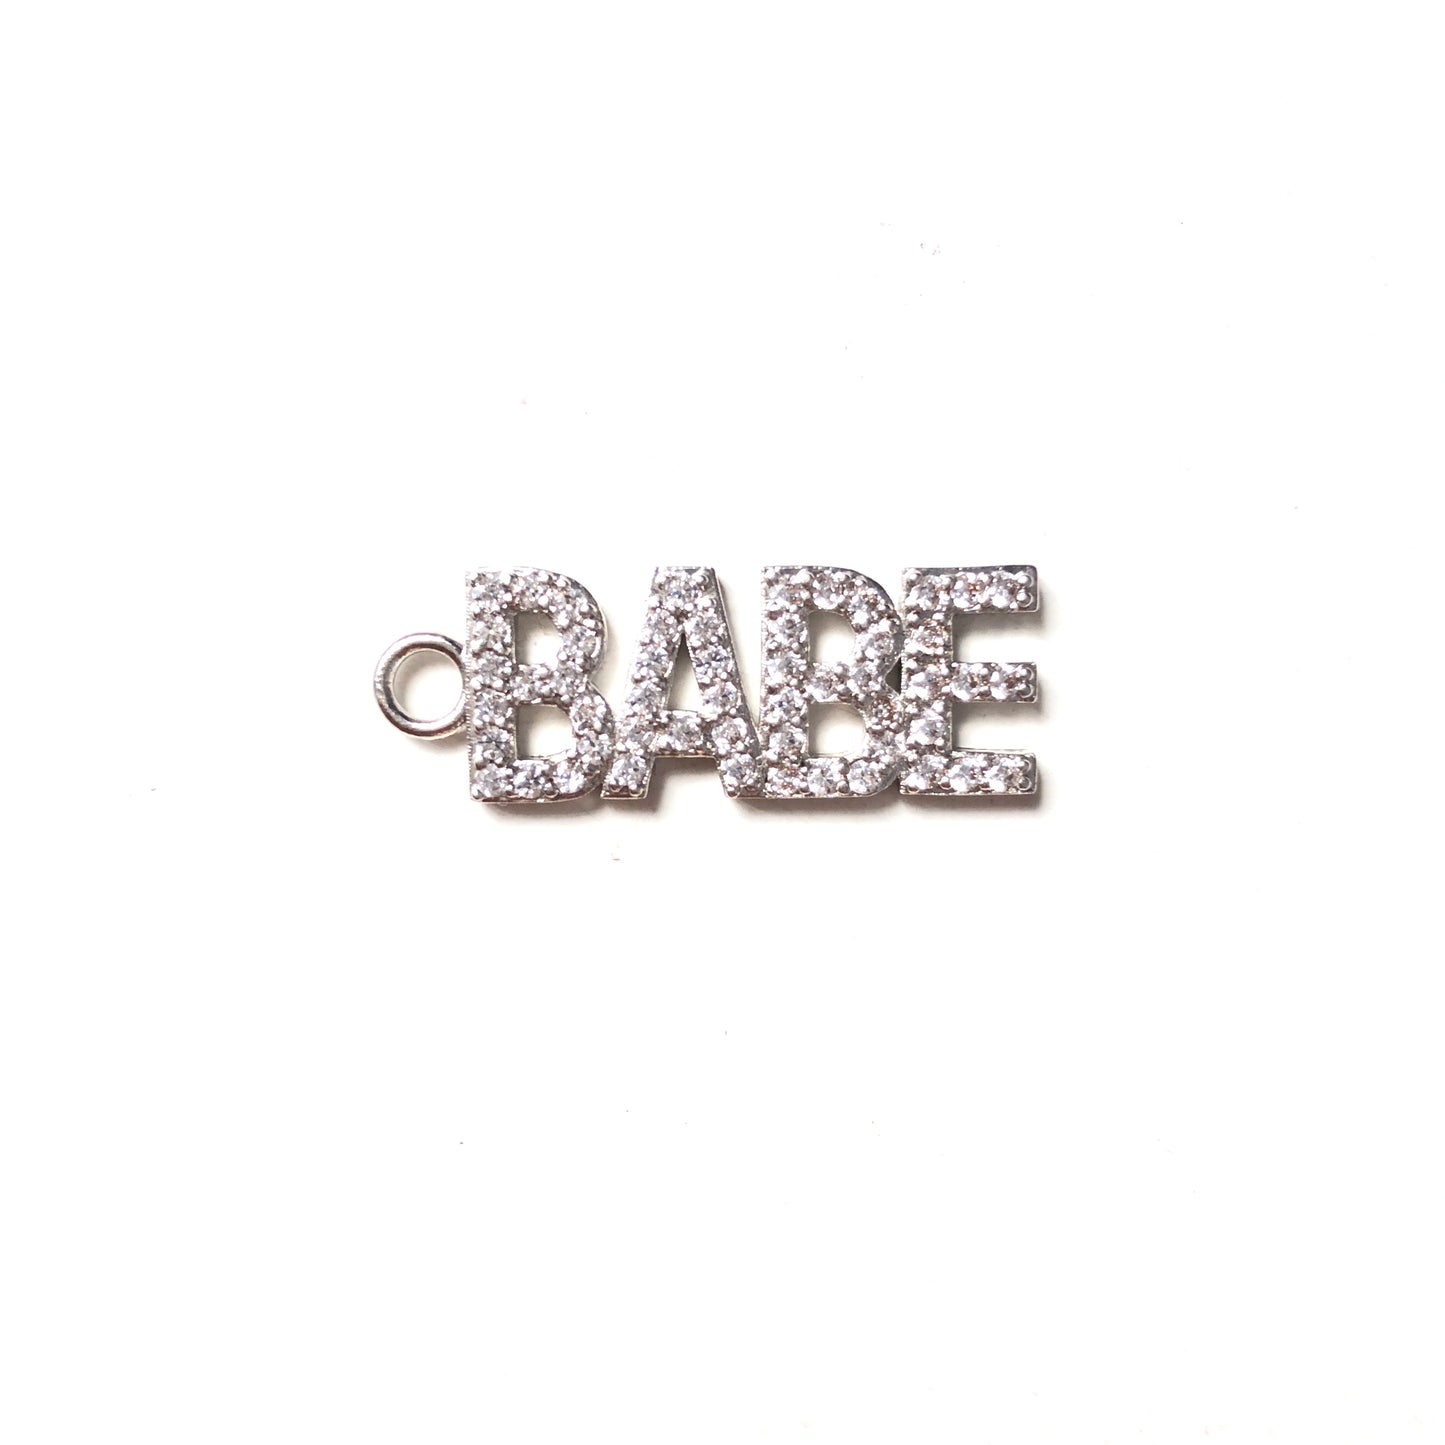 10pcs/lot Silver CZ Paved Letter Charms BABE-10pcs CZ Paved Charms Love Letters Mother's Day Words & Quotes Charms Beads Beyond